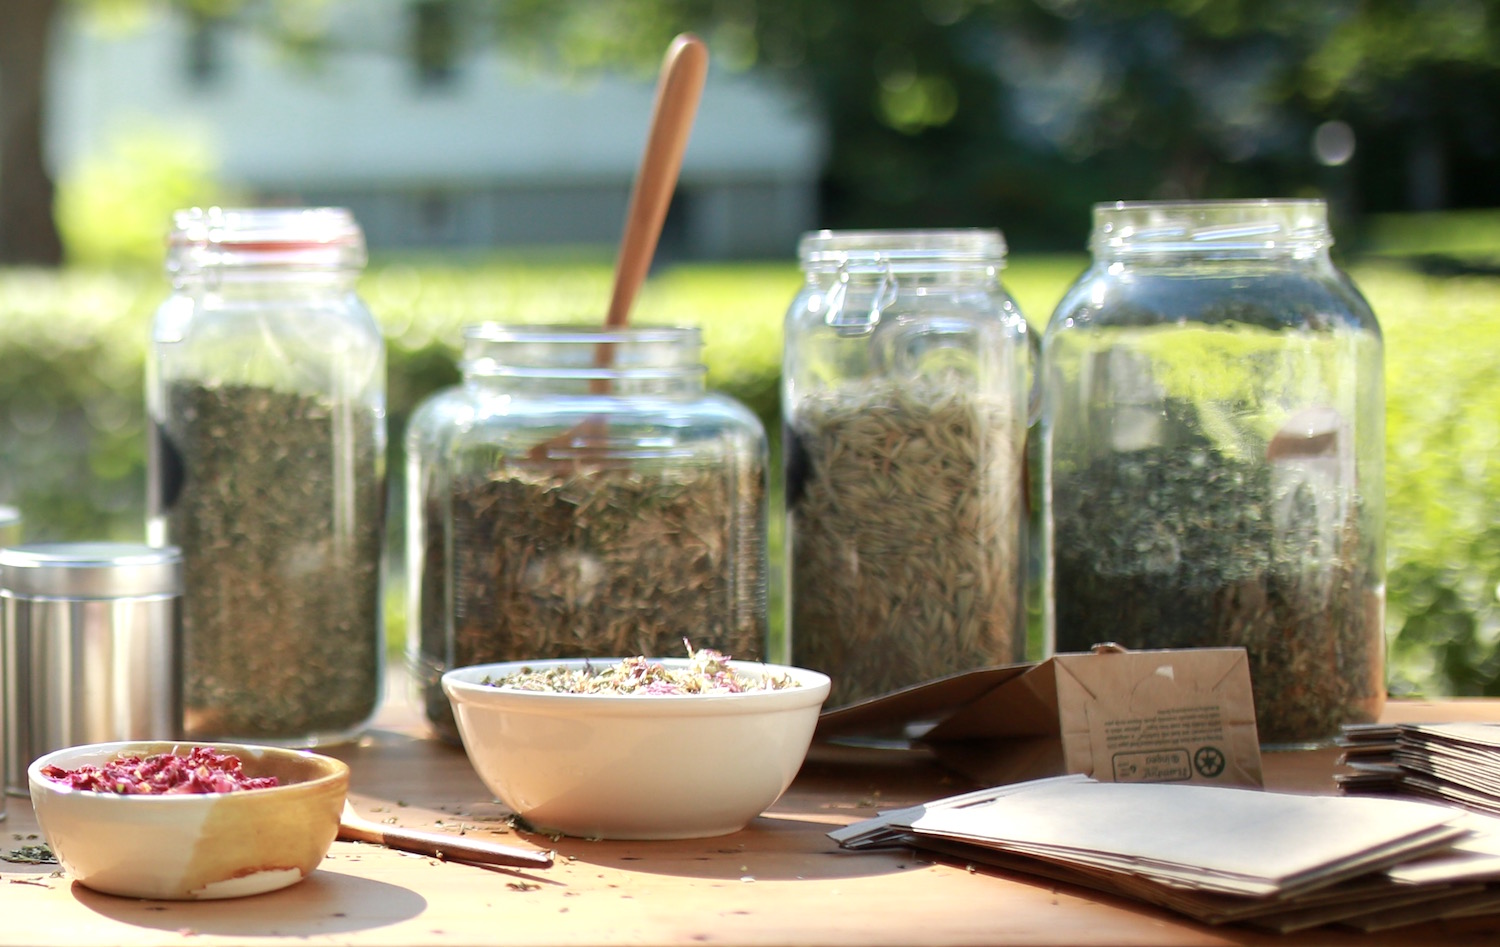 5 Storage Containers Every Herbalist Should Have On Hand | Herbal Academy | Good storage containers are an essential tool for organizing herbs. Let’s take a look at 5 types of storage containers to have on hand!